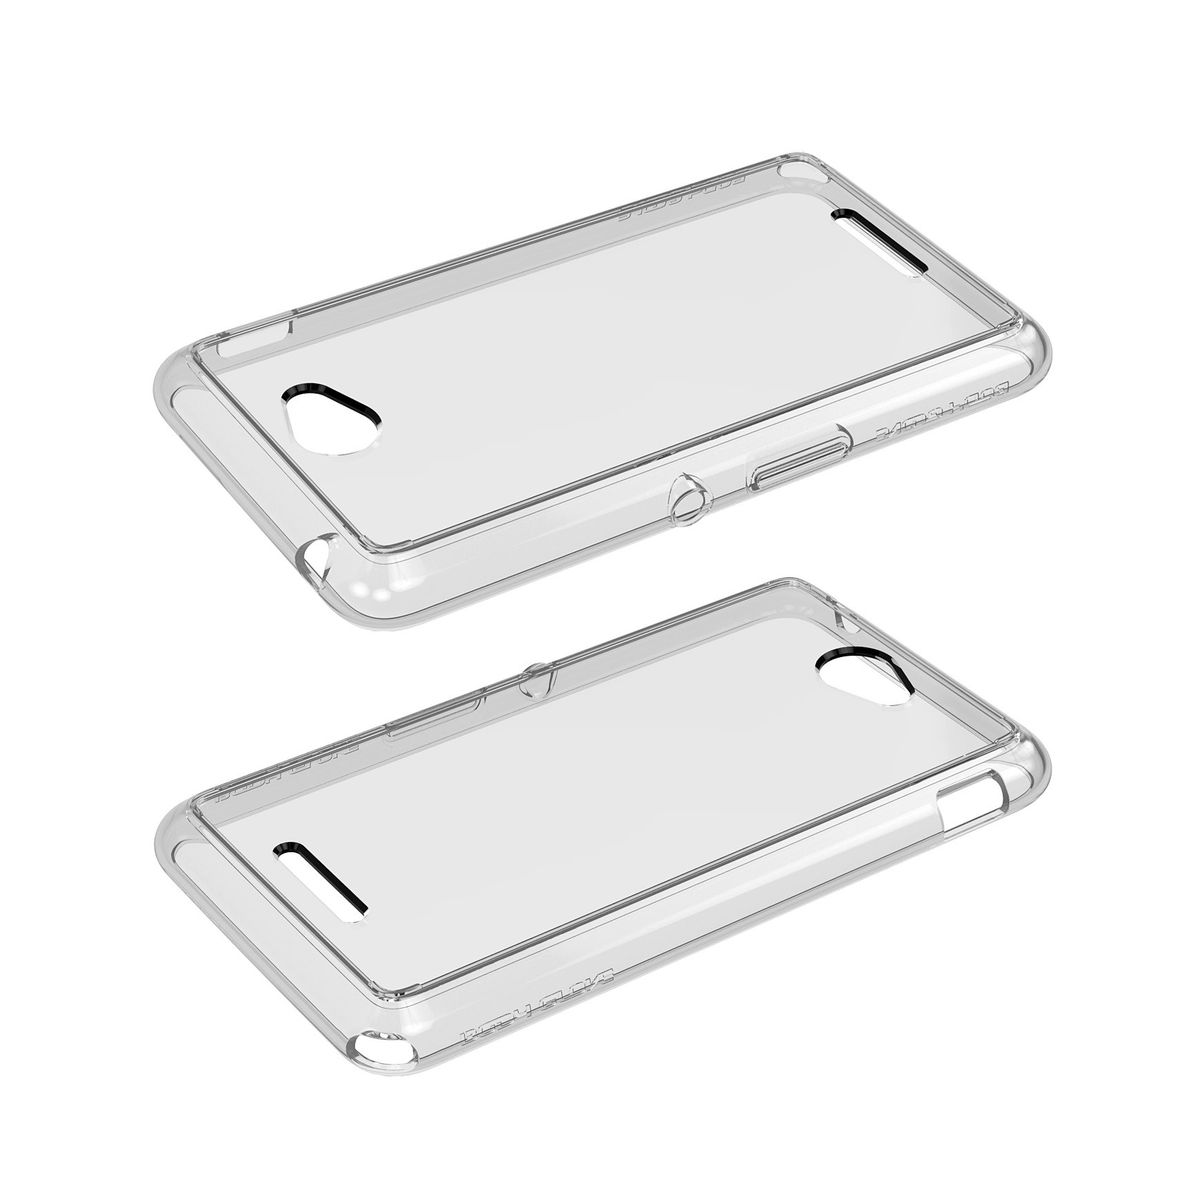 Body Glove Ghost Case for Sony Xperia C4 – Clear